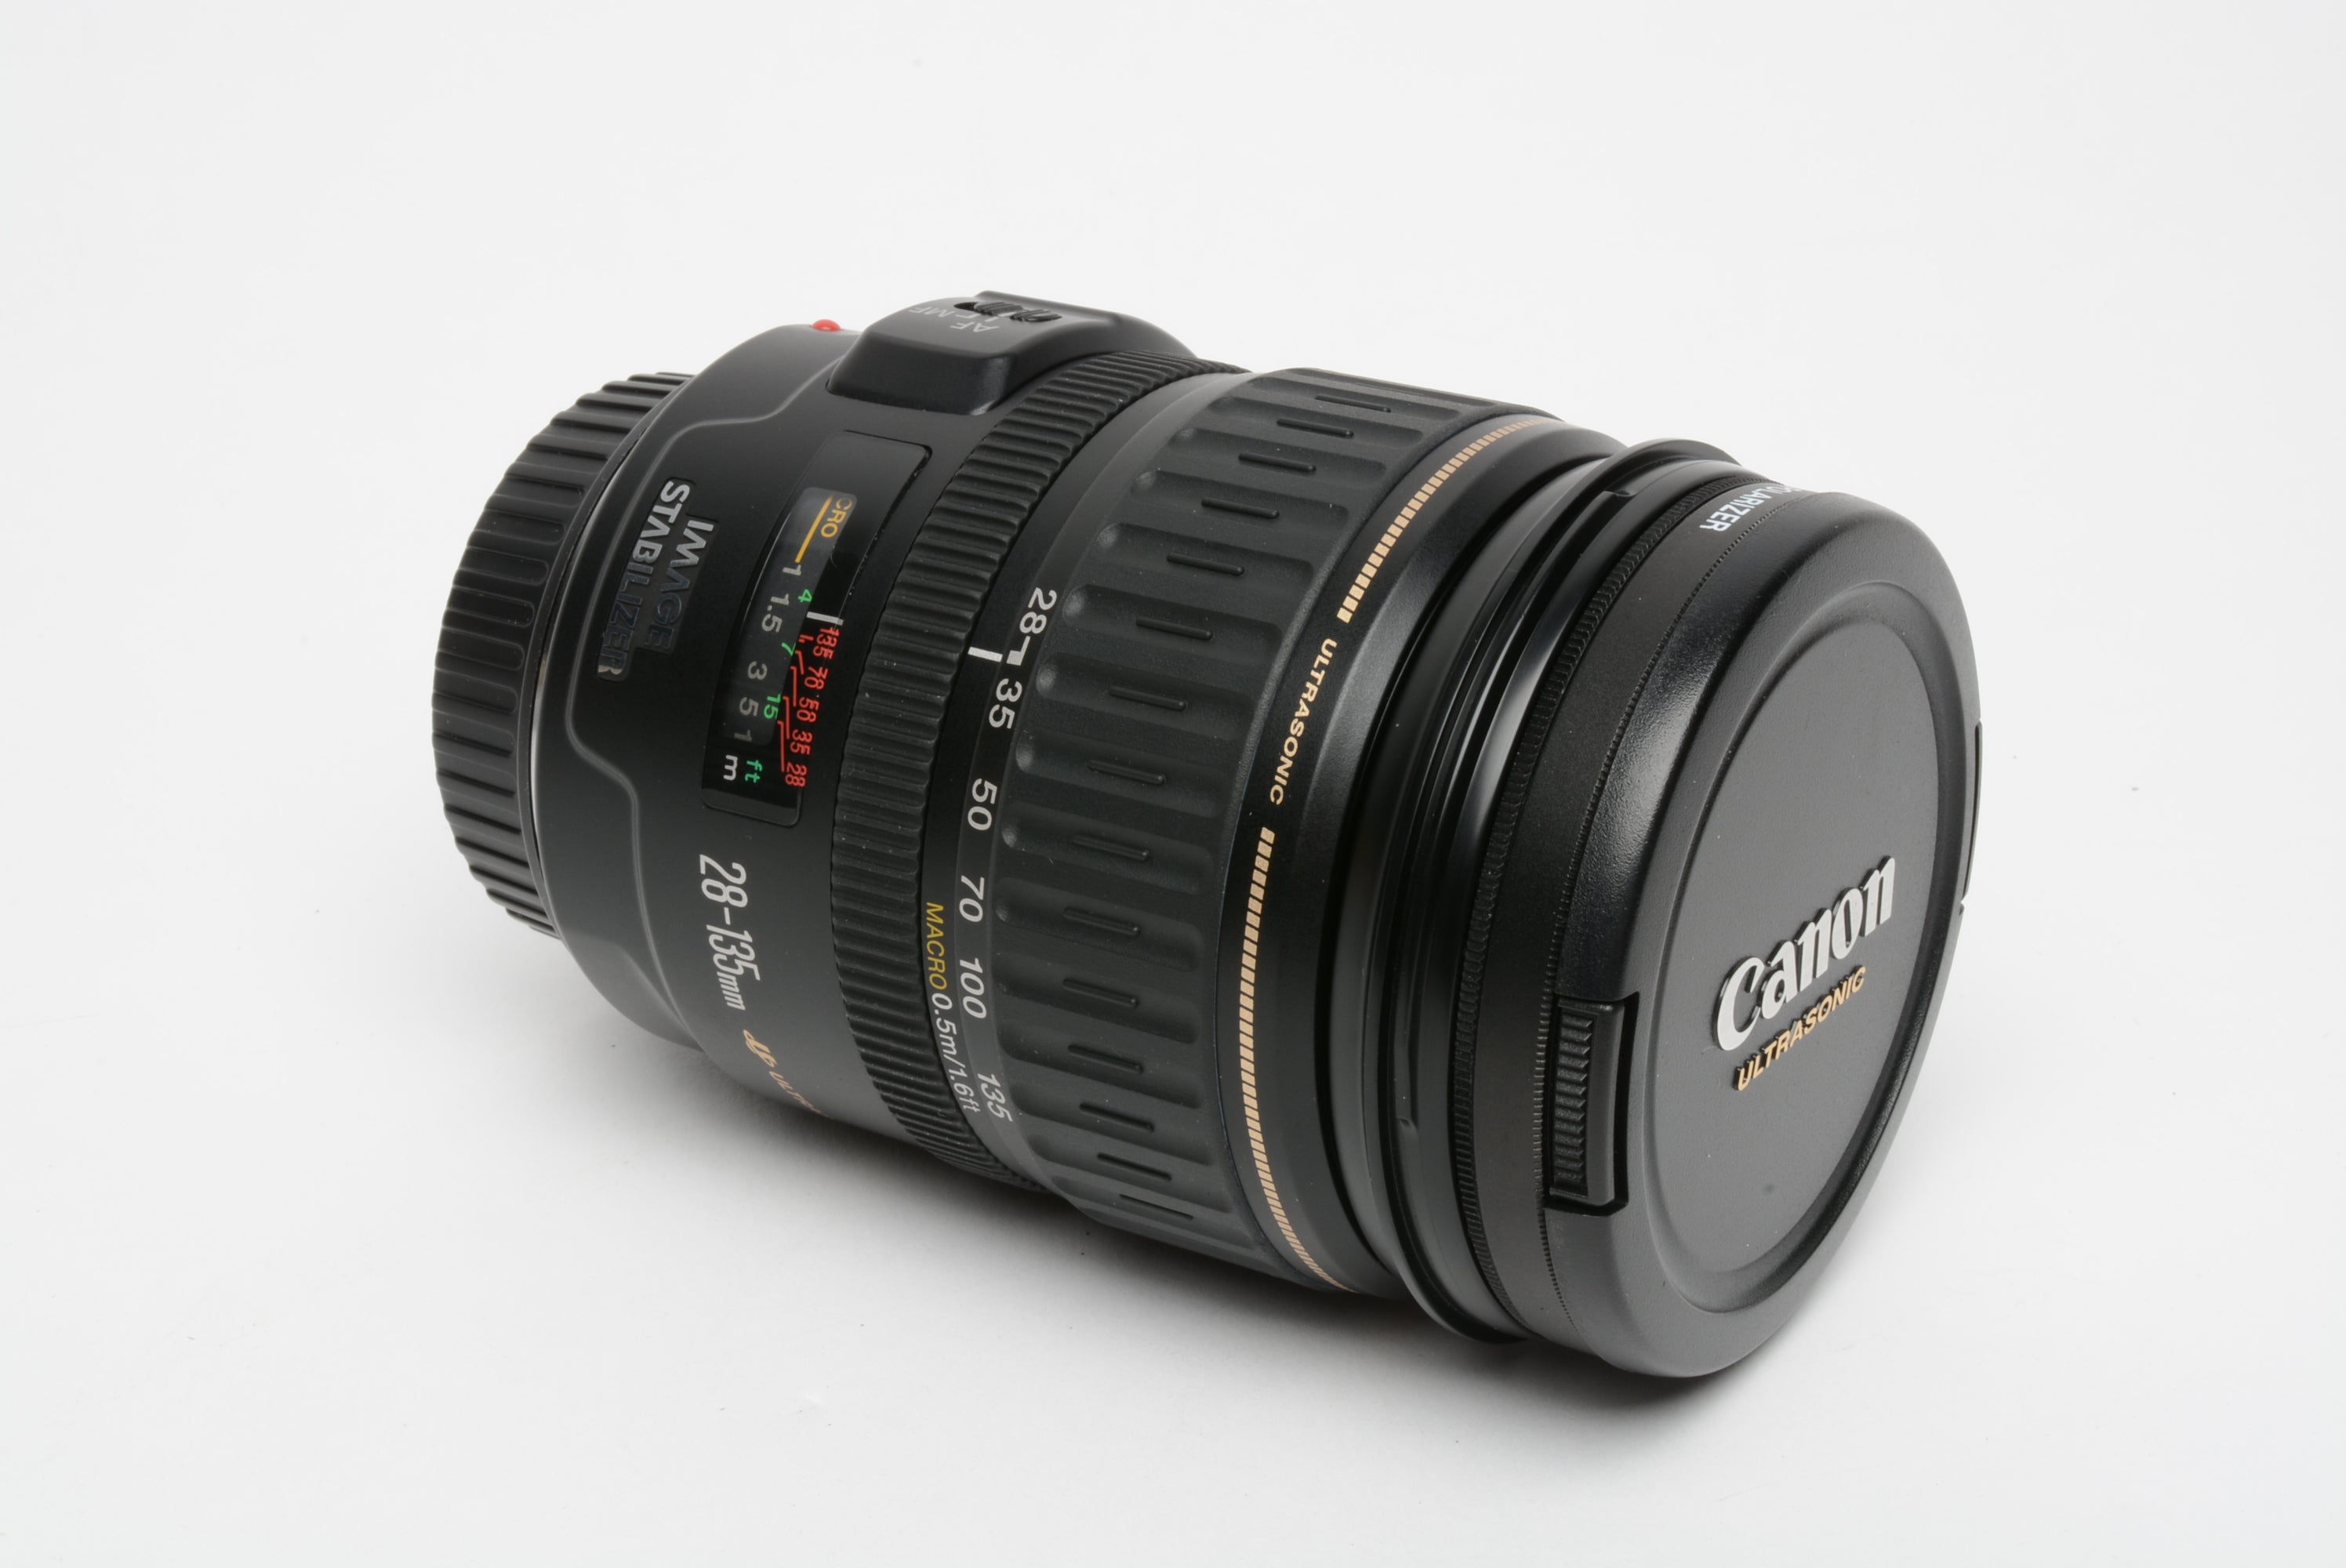 Canon EF 28-135mm f3.5-5.6 IS zoom lens